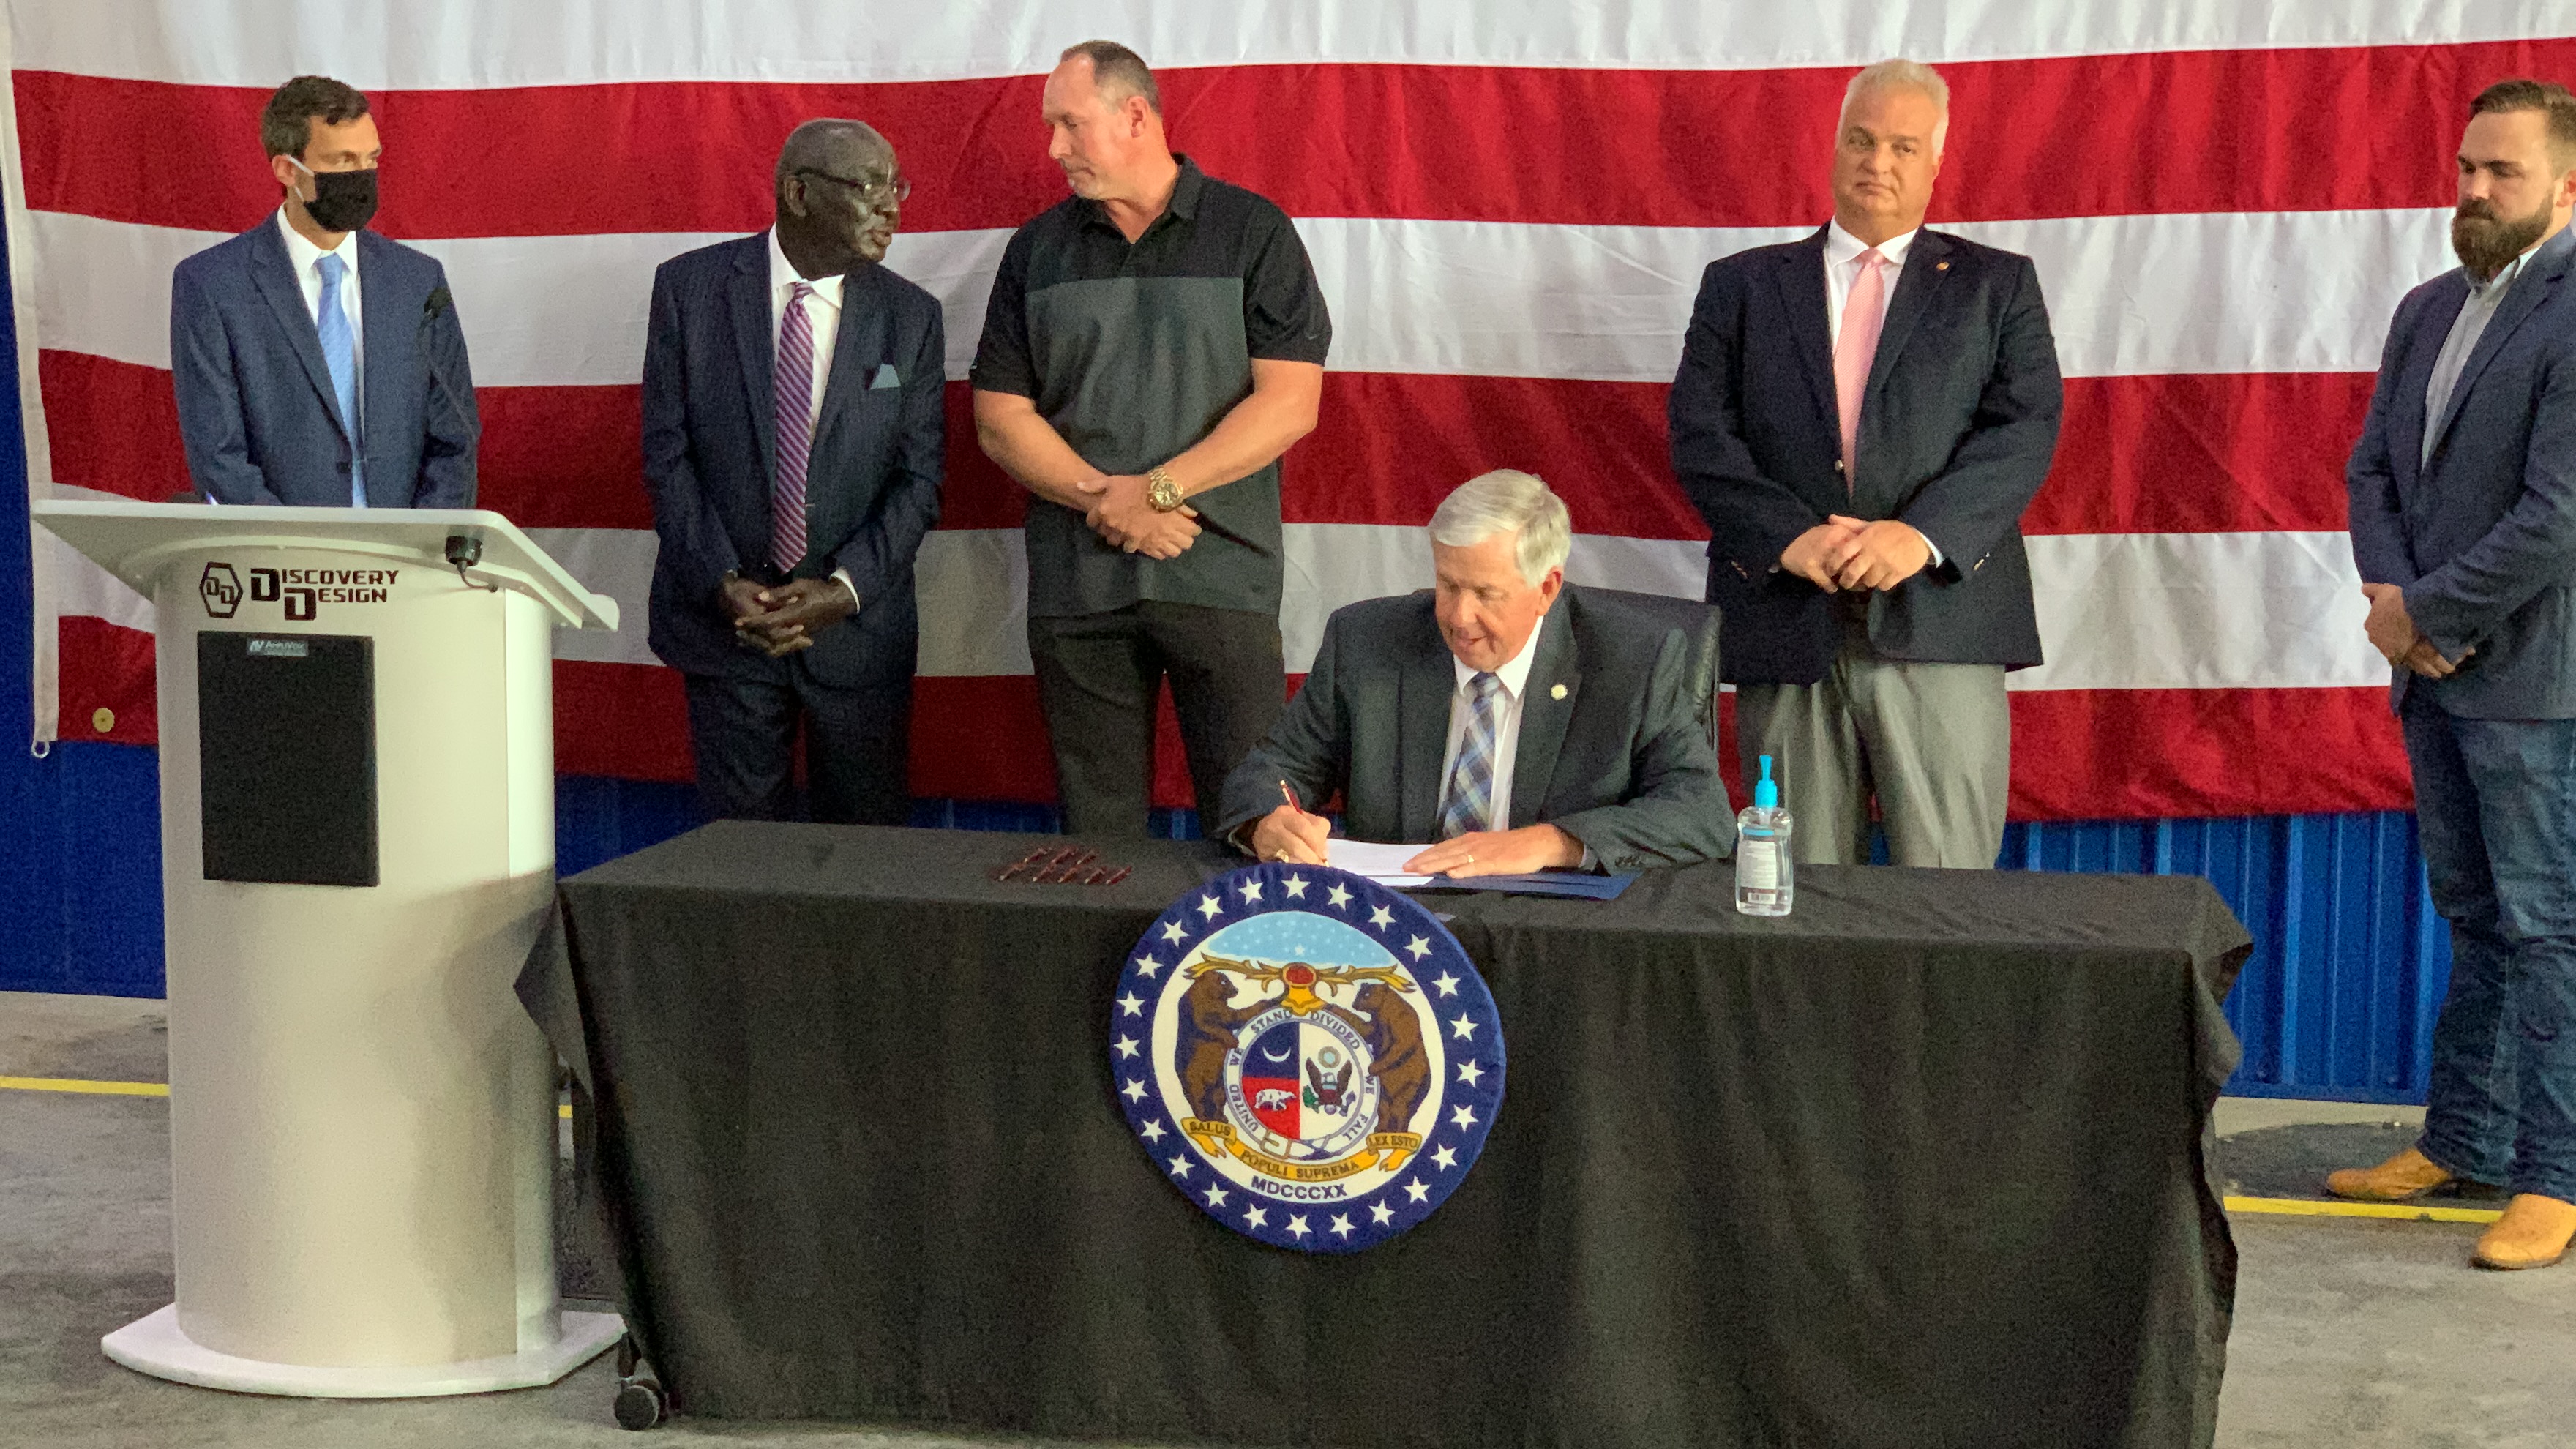 Image for GOVERNOR PARSON SIGNS SB 591 REGARDING PUNITIVE DAMAGES AND UNLAWFUL MERCHANDISING PRACTICES